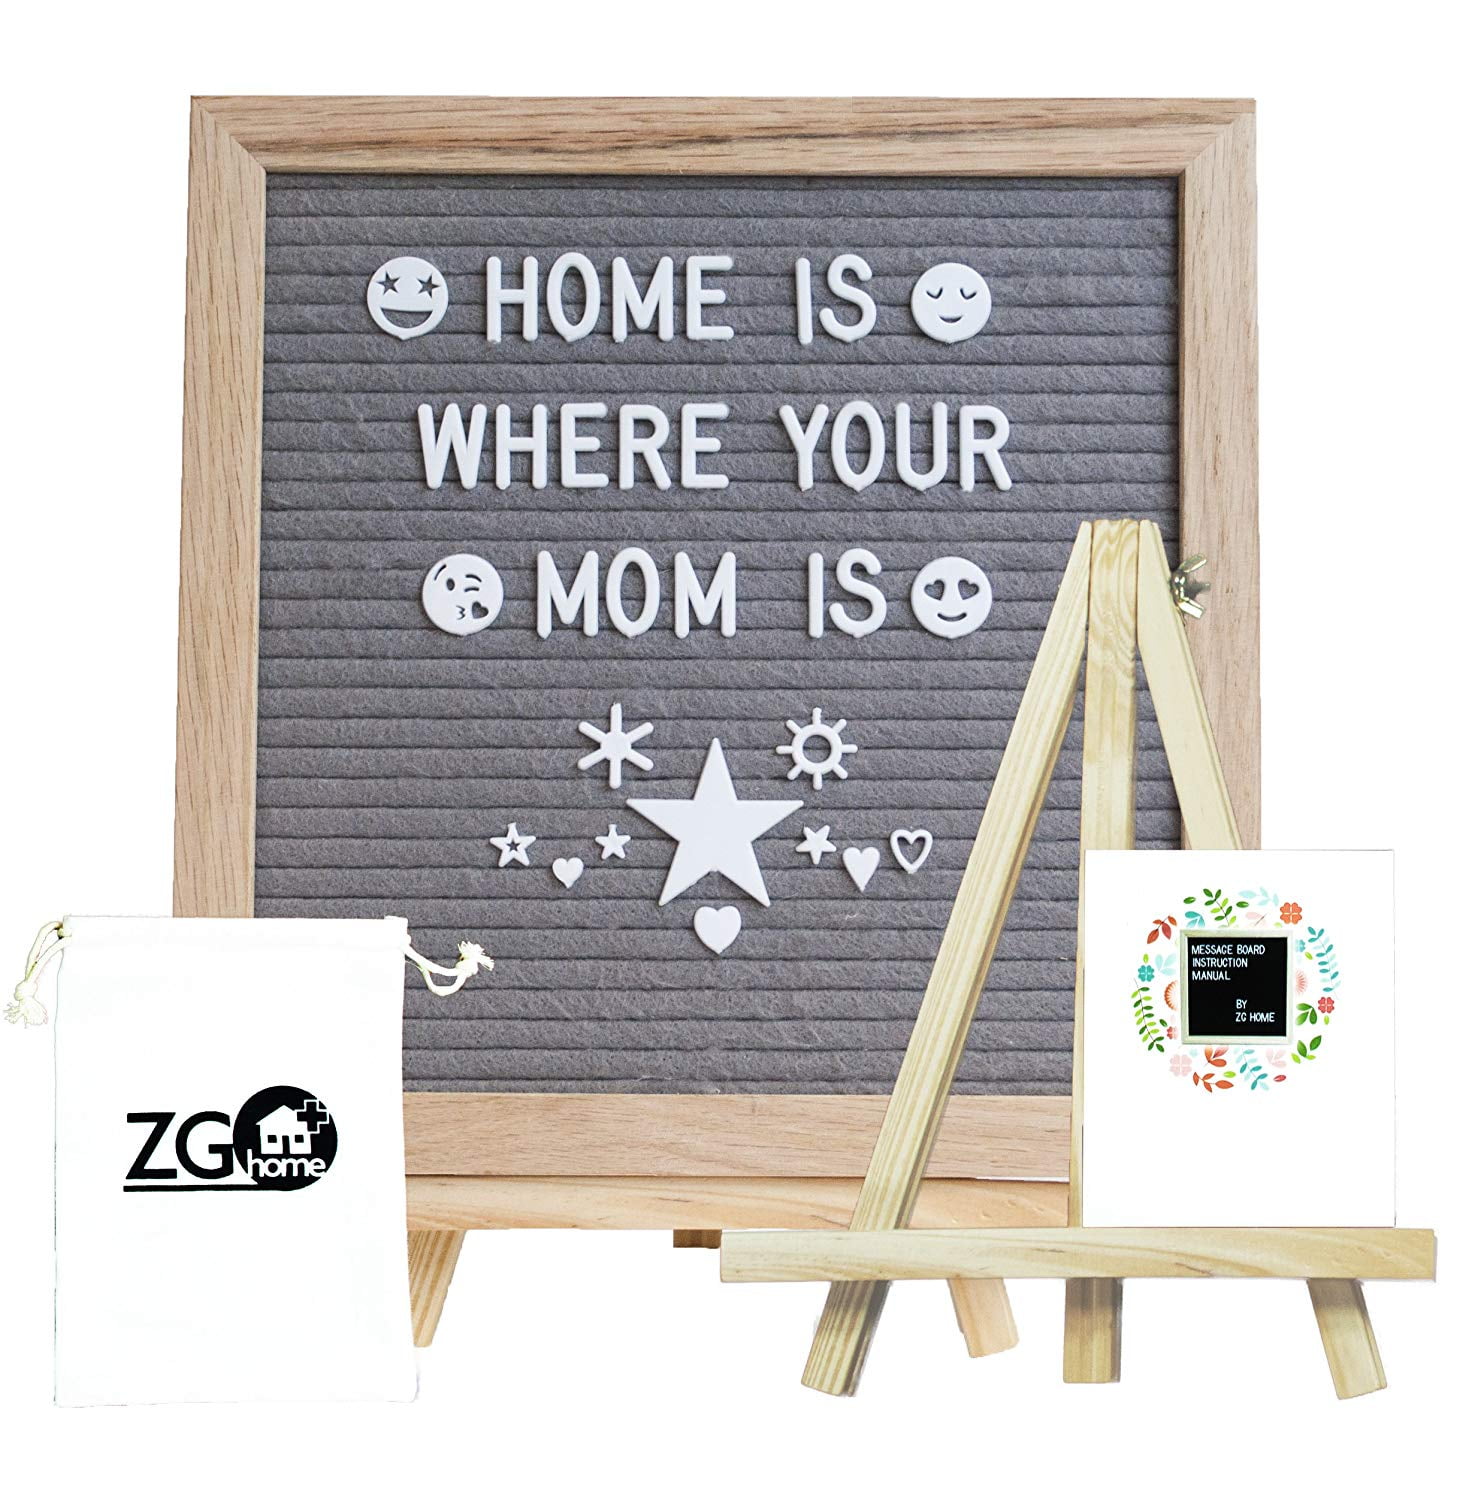 Symbols Comes with Canvas Bag and Scissors. Letter Board with White Changeable Letters Oak Wood Frame with Convenient Stand Emoji and Numbers Black Felt Letter Board 10x10 inch 